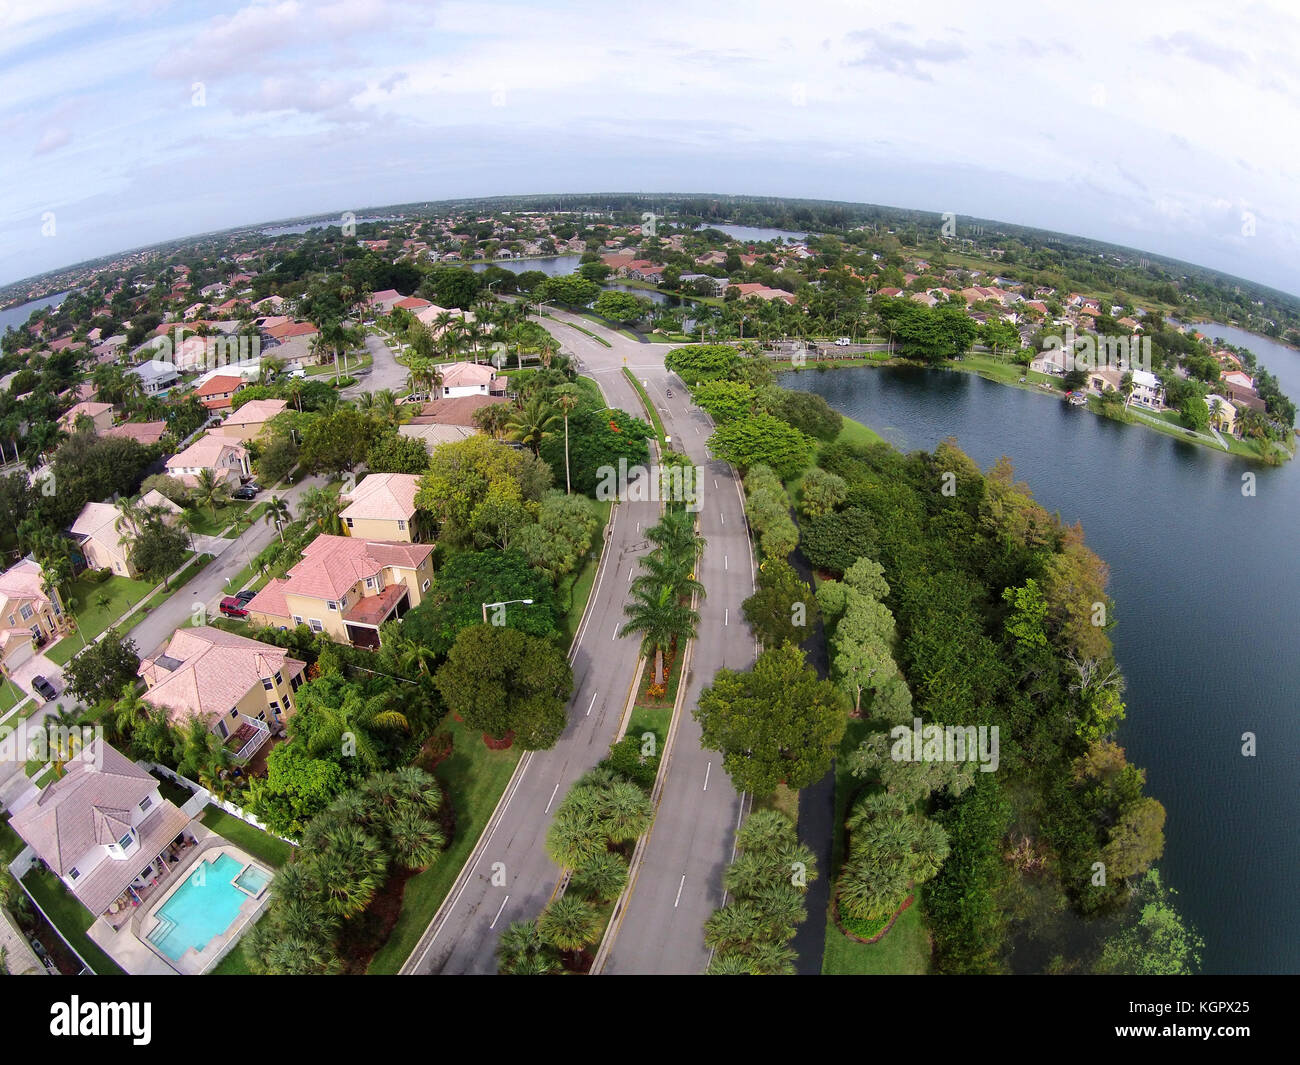 Middle class neighborhood in Florida aerial view Stock Photo